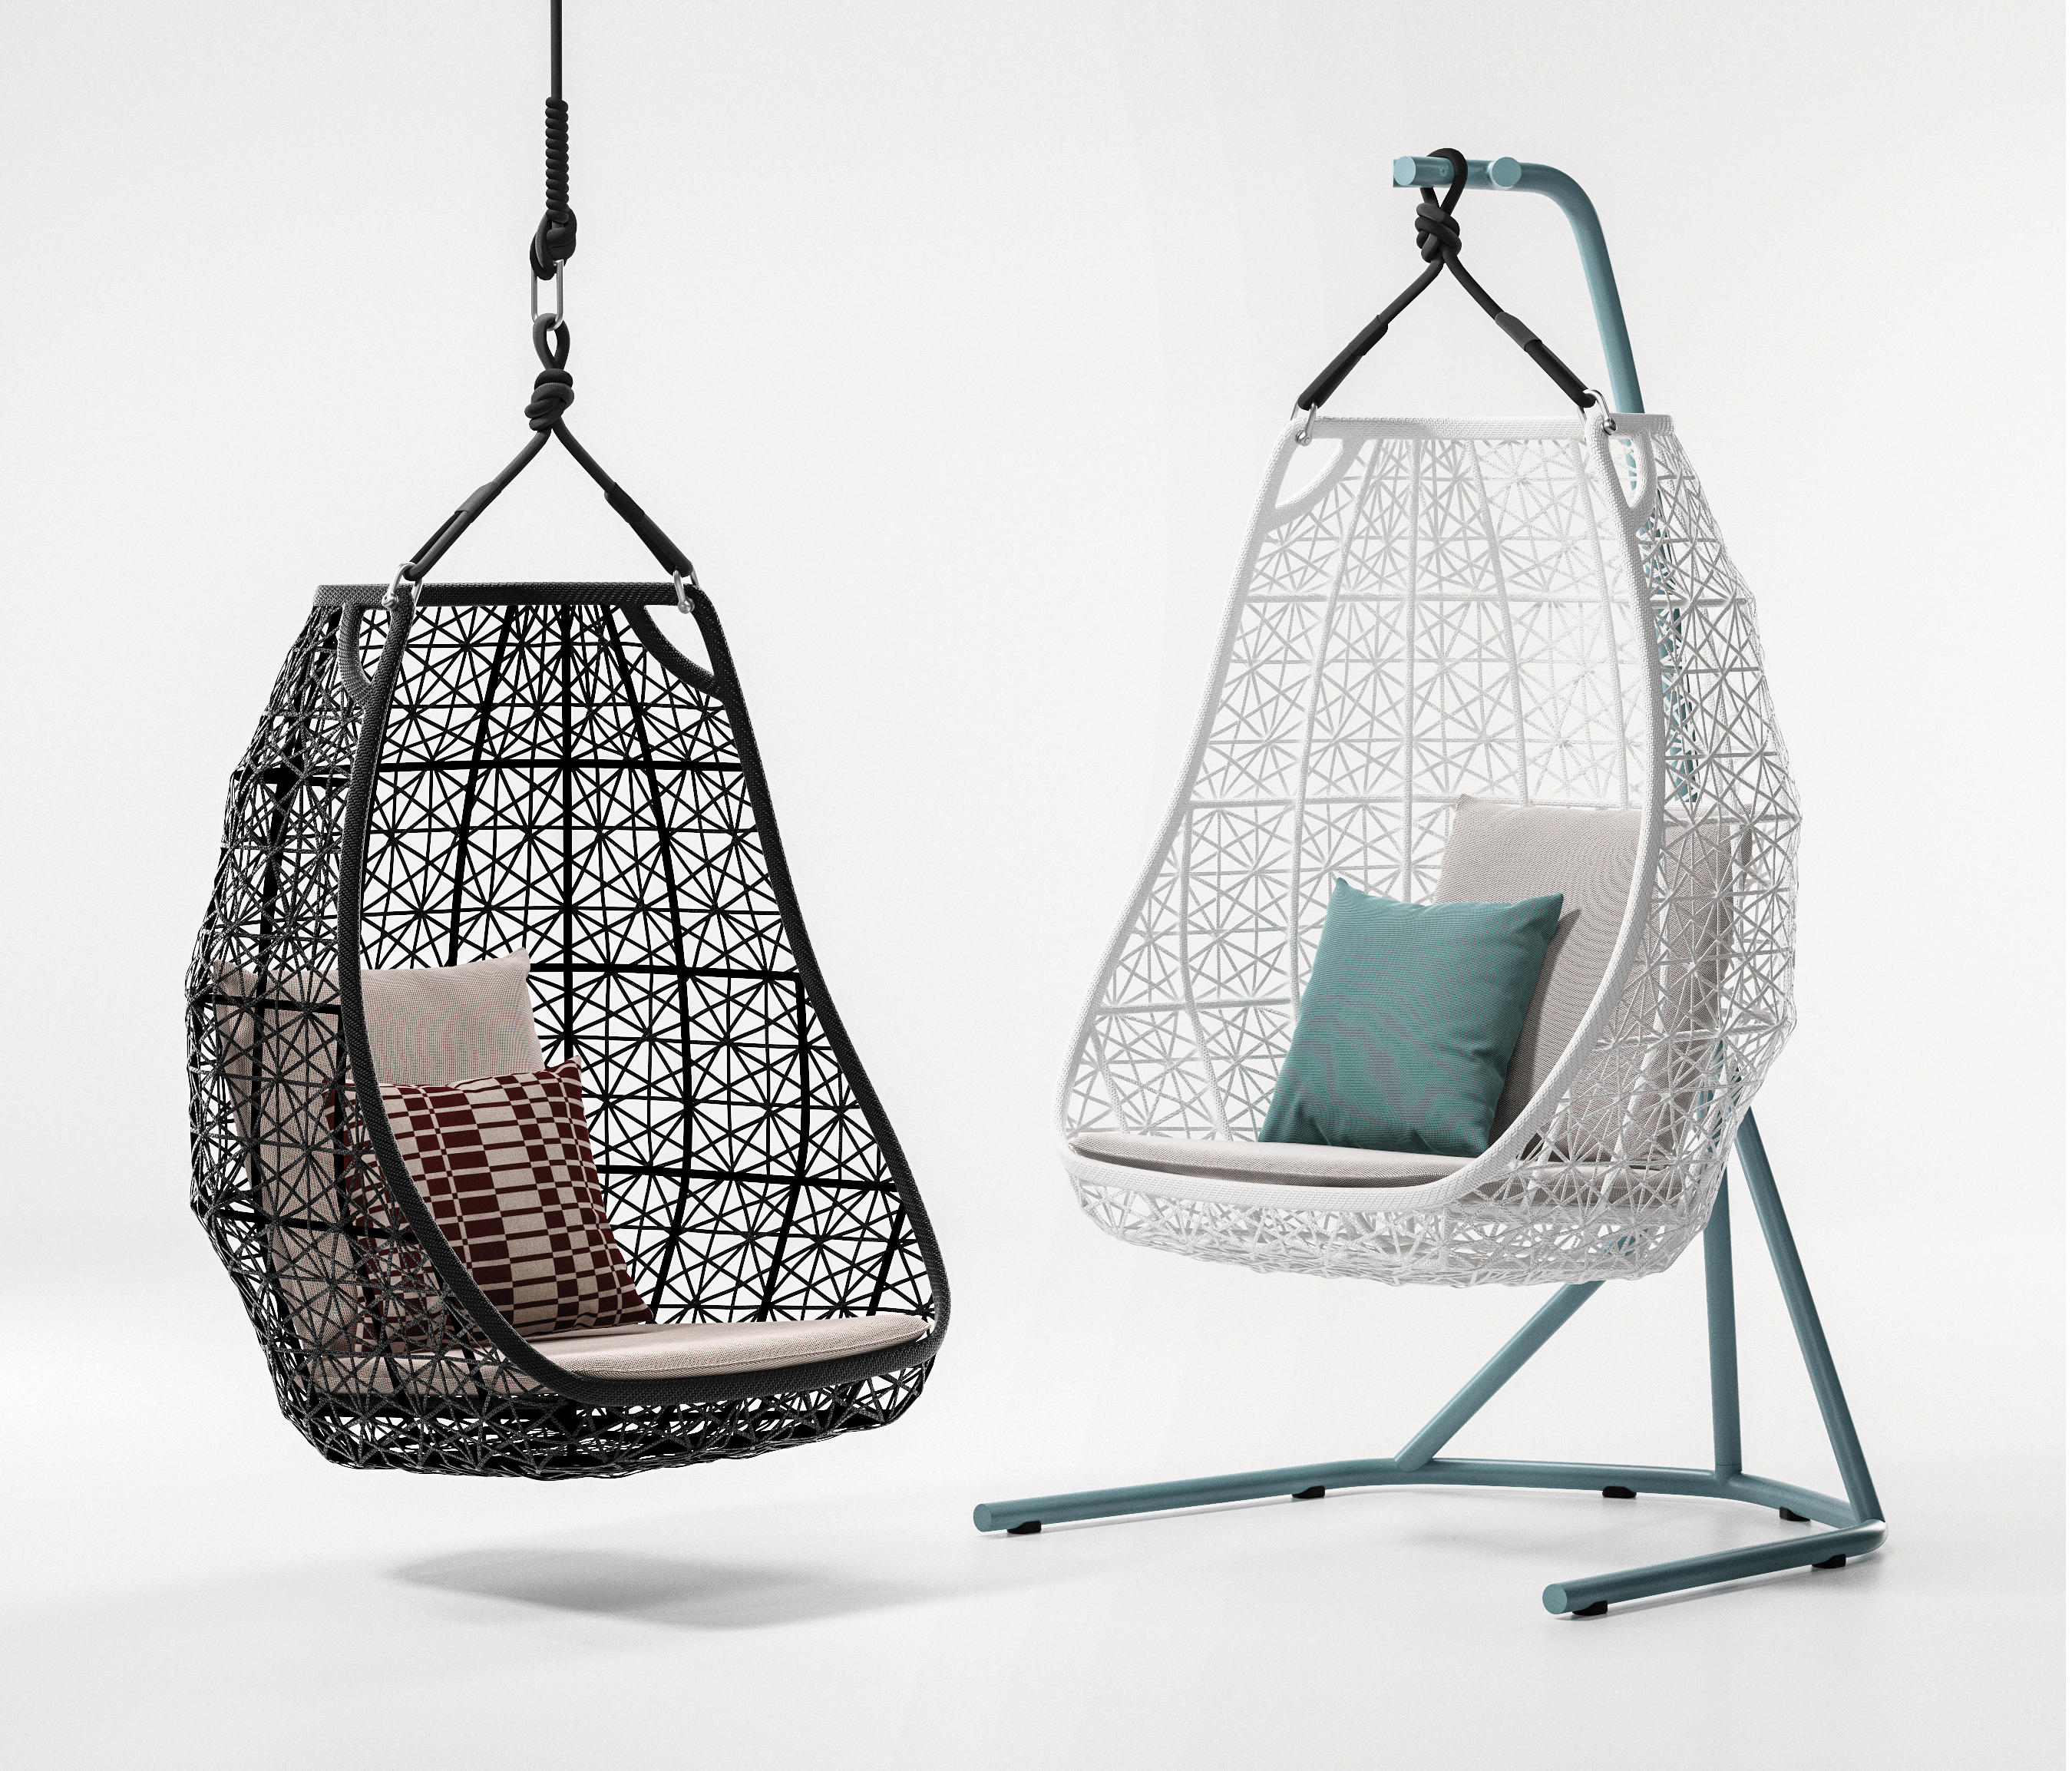 Kettal Maia Rope Furniture Collection by Patricia Urquiola